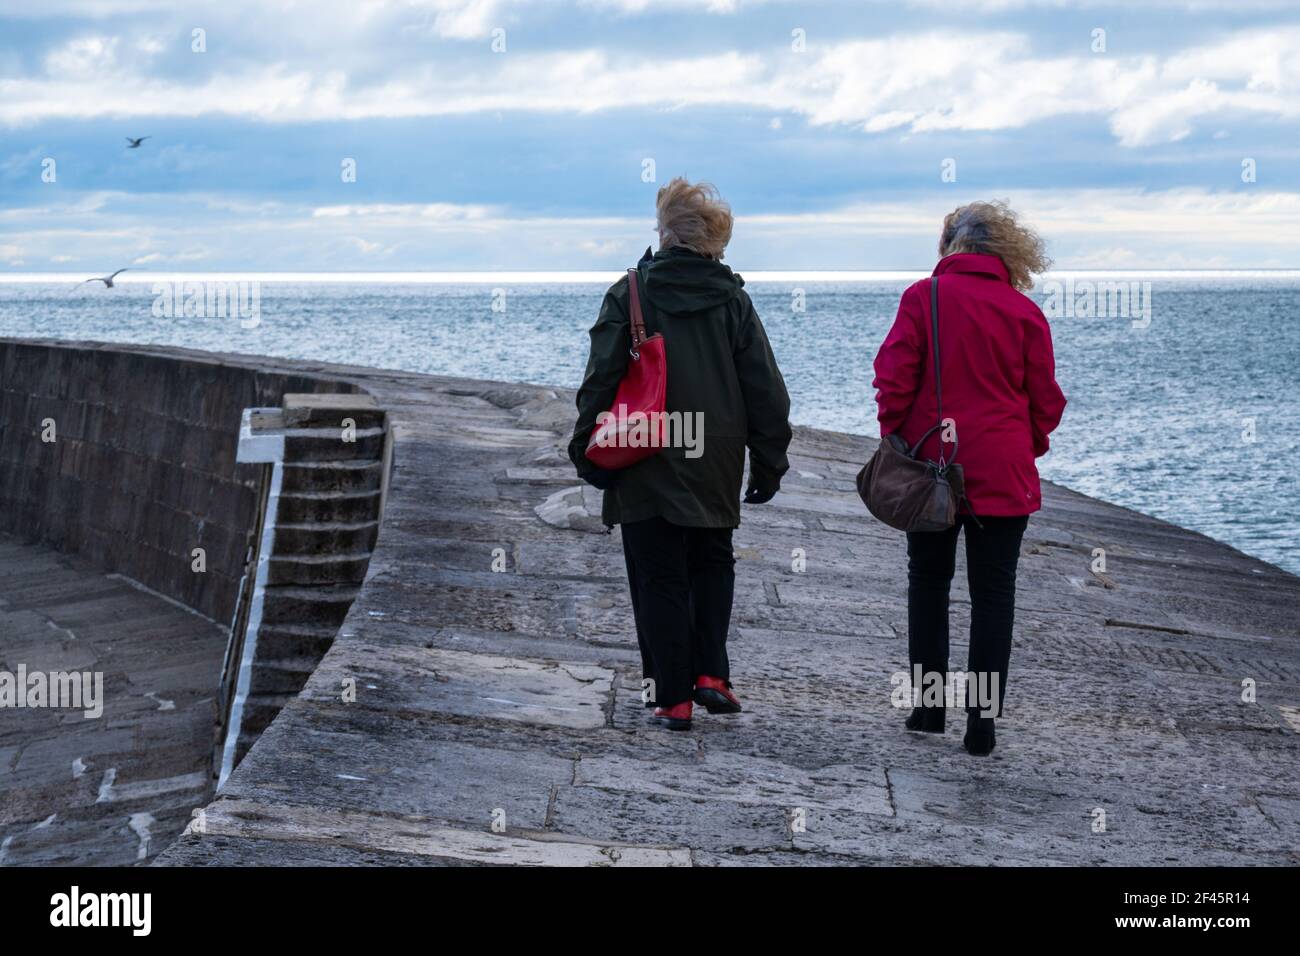 Lyme Regis, Dorset, UK. 19th March 2021. UK Weather: Sunshine and cloud along with a chilly breeze at the seaside resort of Lyme Regis. People take a brisk walk along the Cobb, but a  bracing sea breeze kept many people away. Credit: Celia McMahon/Alamy Live News. Stock Photo